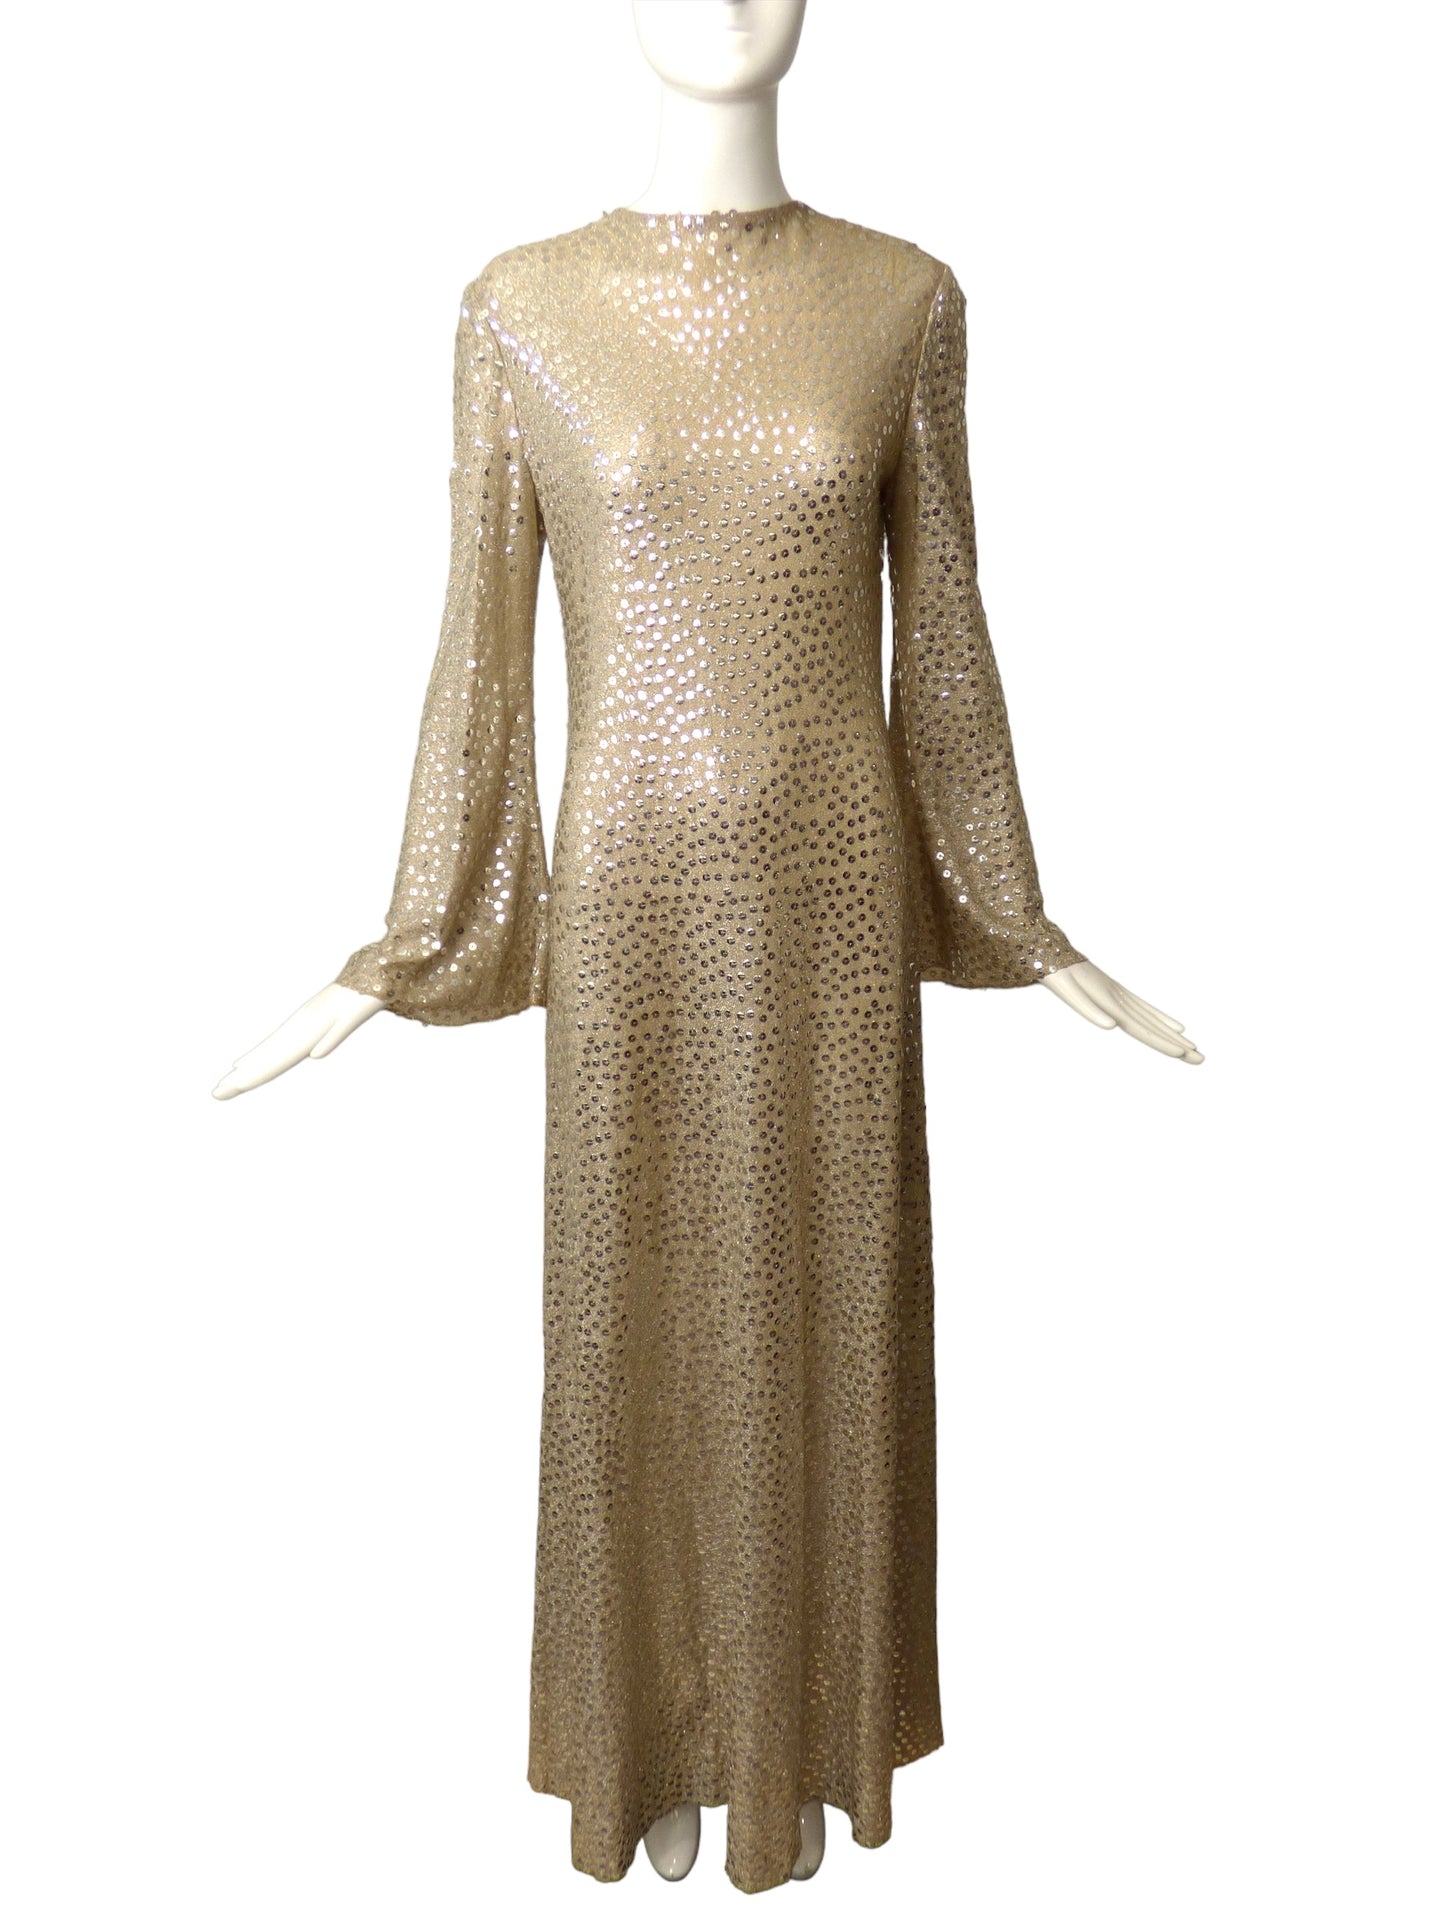 MOLLIE PARNIS- 1970s Silver Sequin Gown, Size 8